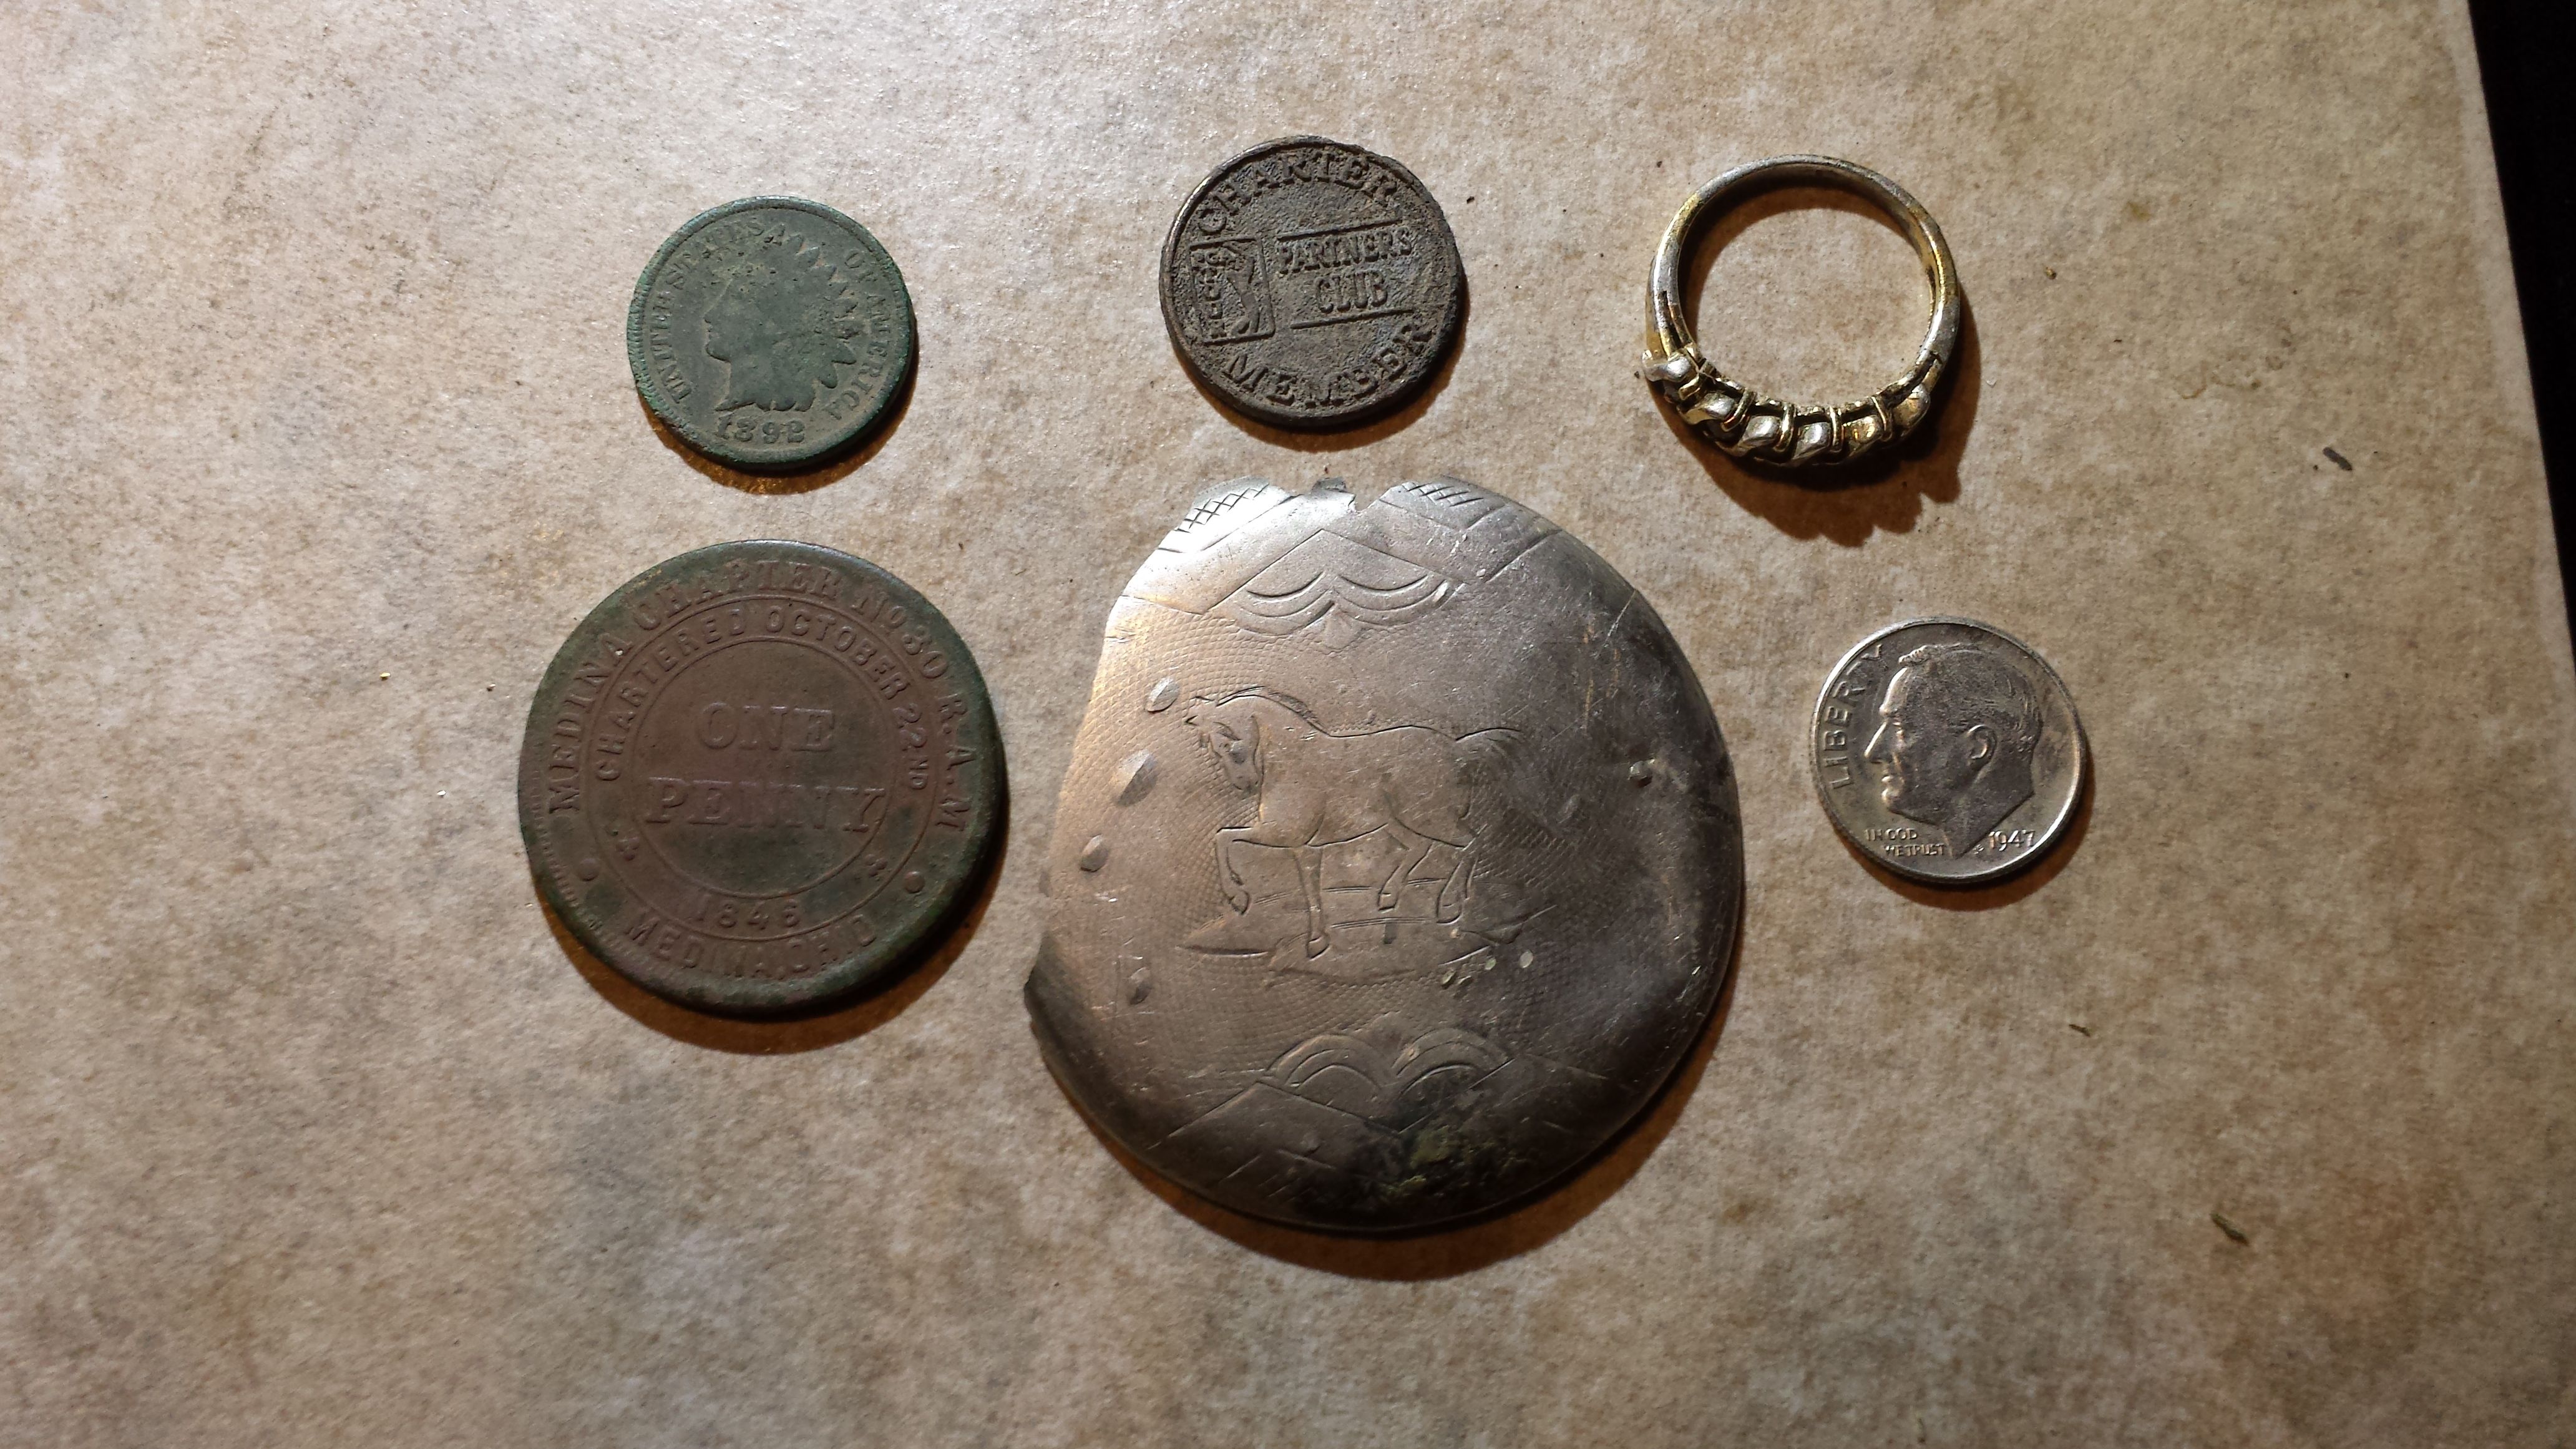 20151122 172422  Shawn's house notables.  1892 IHP, 1947D Rosie, Medina Masonic Penny Token, Plated ring, SIlver pocket watch piece.